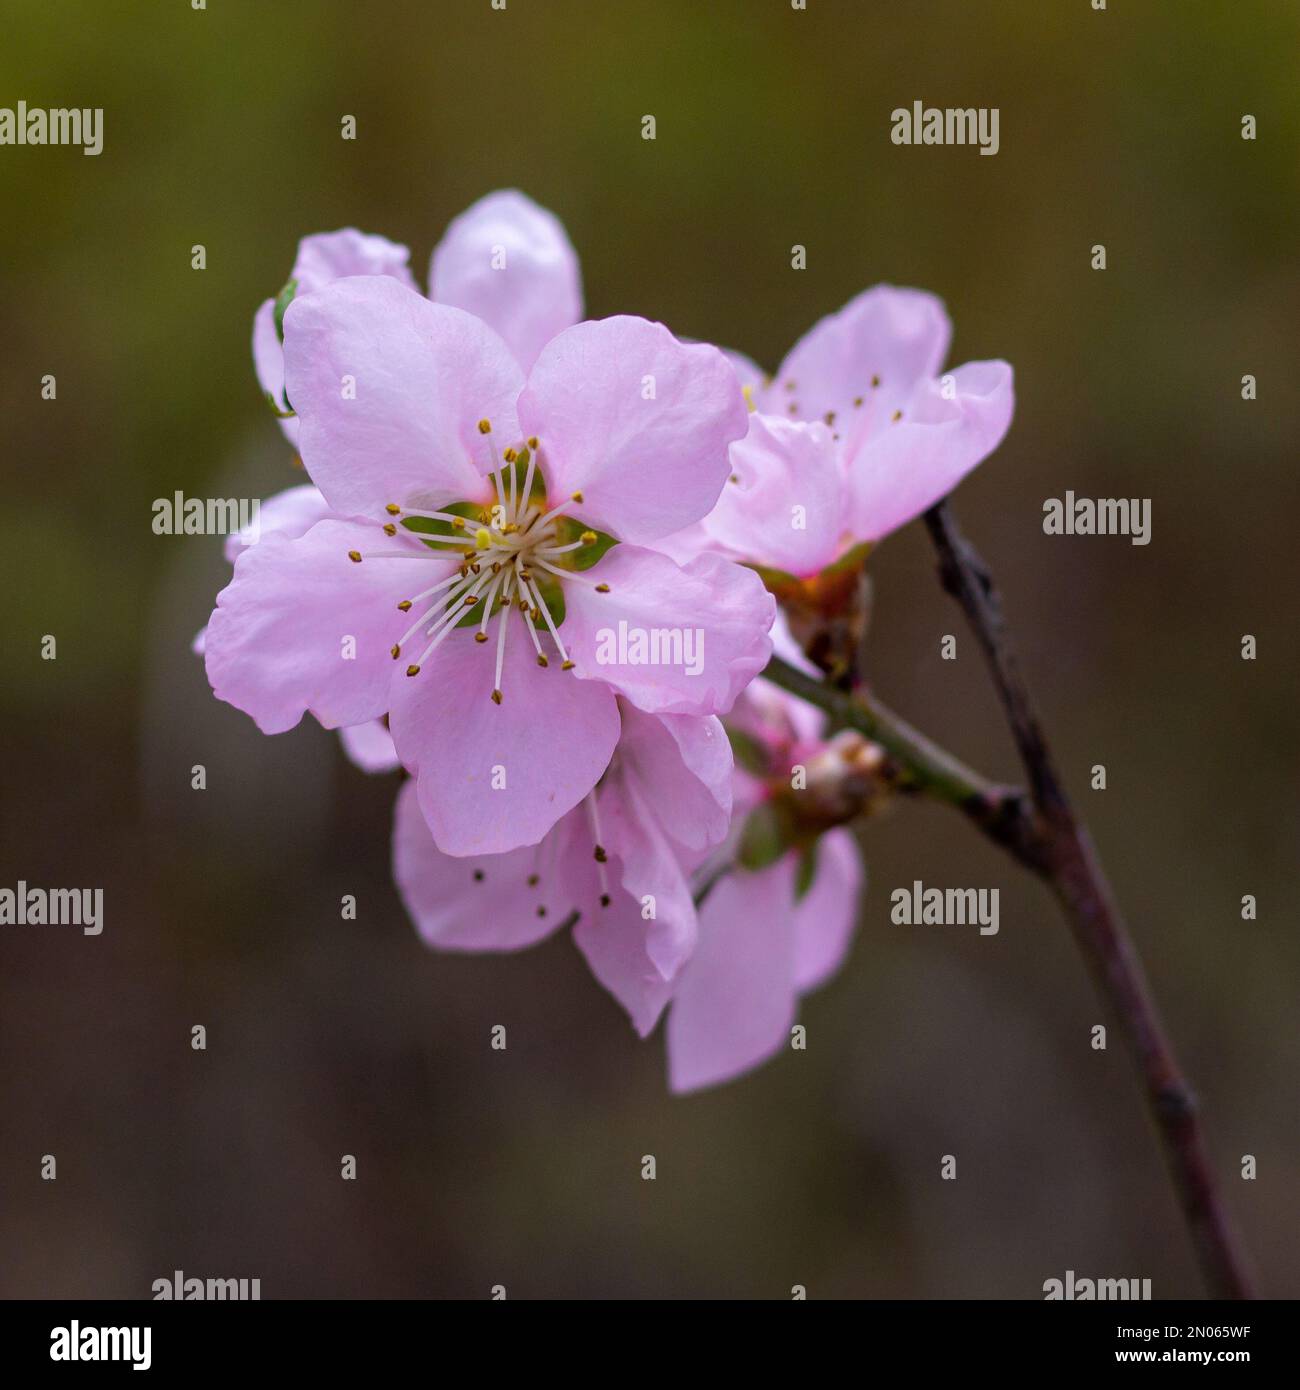 Delicate pretty flowering sprigs of peach or nectarine in spring. Stock Photo